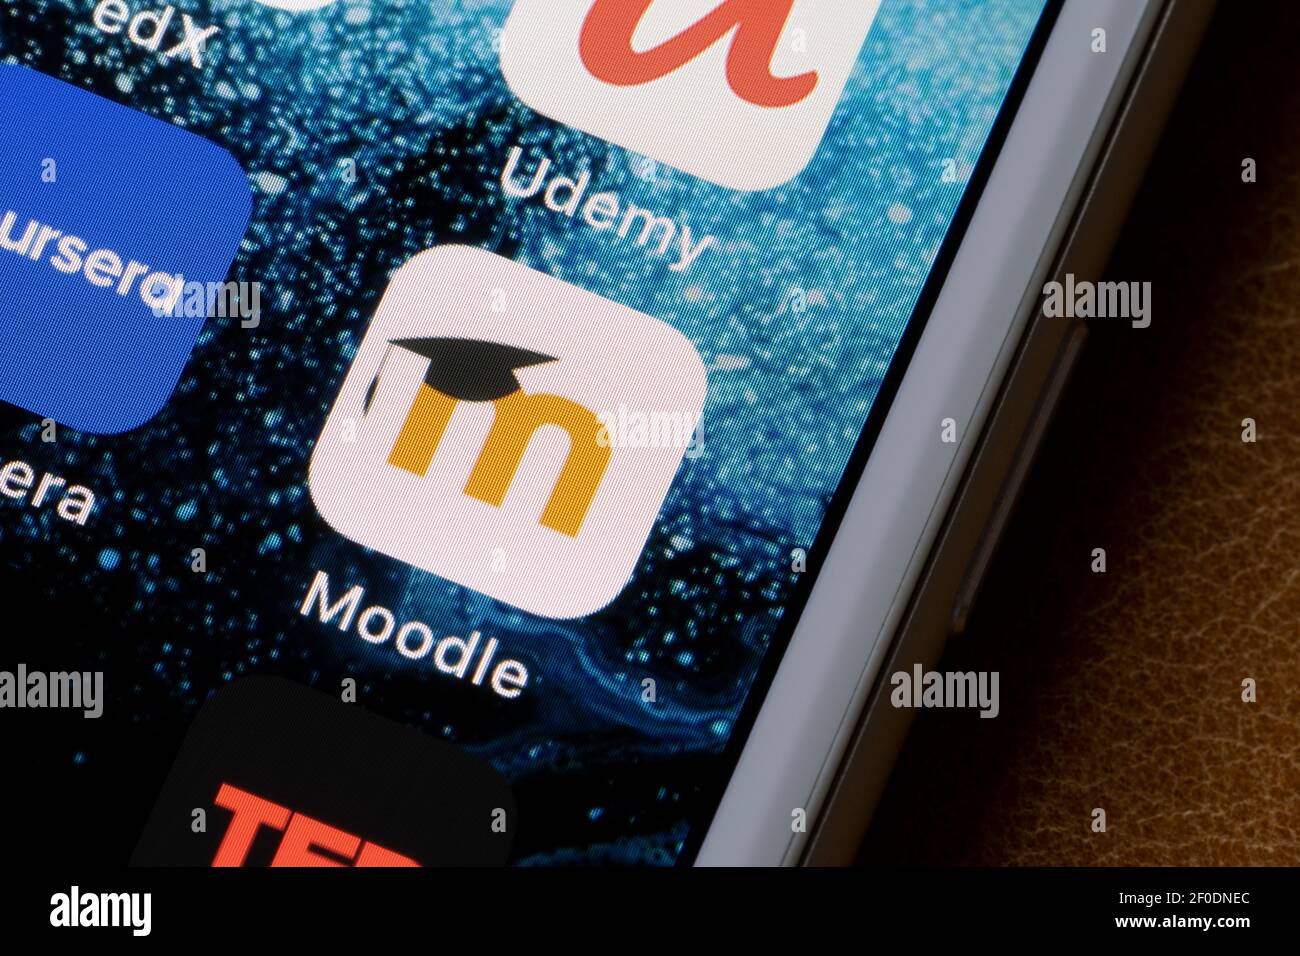 Moodle app icon is seen on an iPhone. Moodle is a Learning Platform or course management system (CMS) - a free Open Source software package. Stock Photo